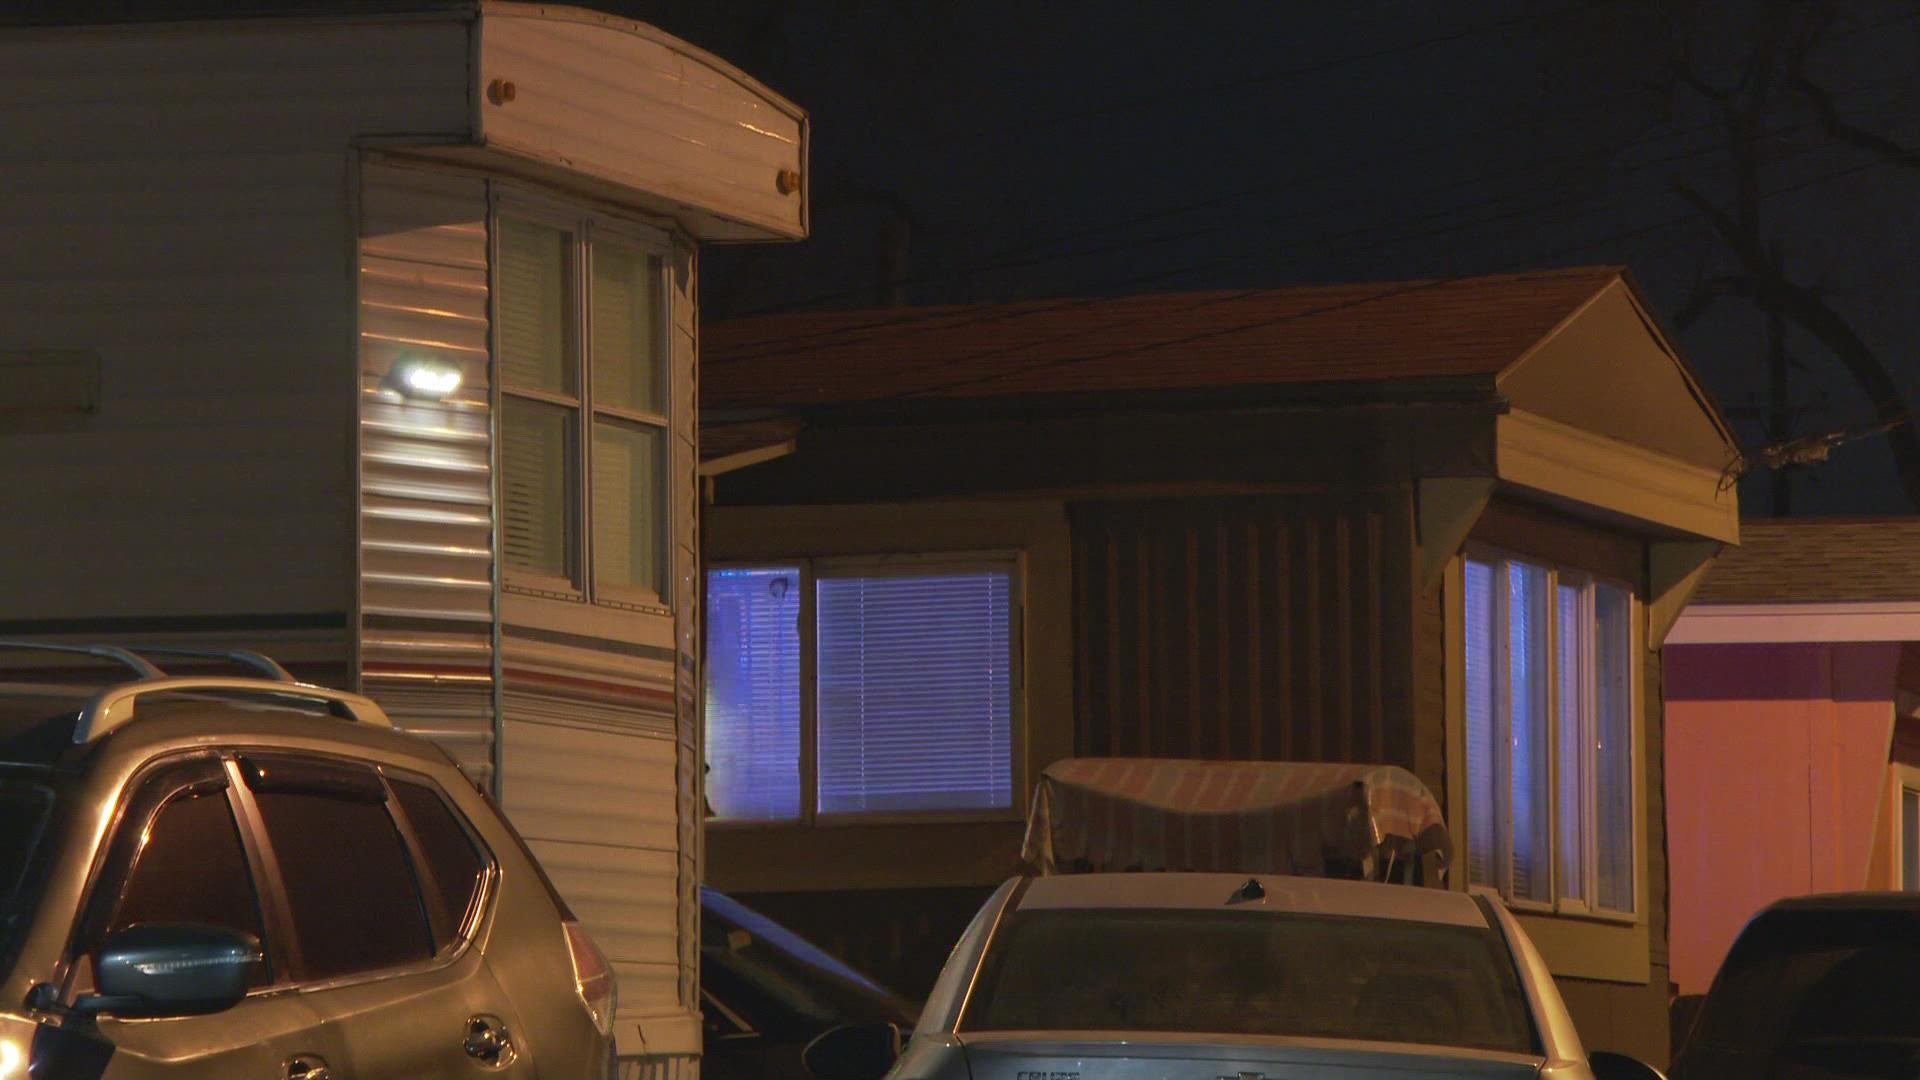 Only 5 mobile home parks remain in Denver. People in Westwood are hoping to create a cooperative that would put the ownership of the park in the residents hands.